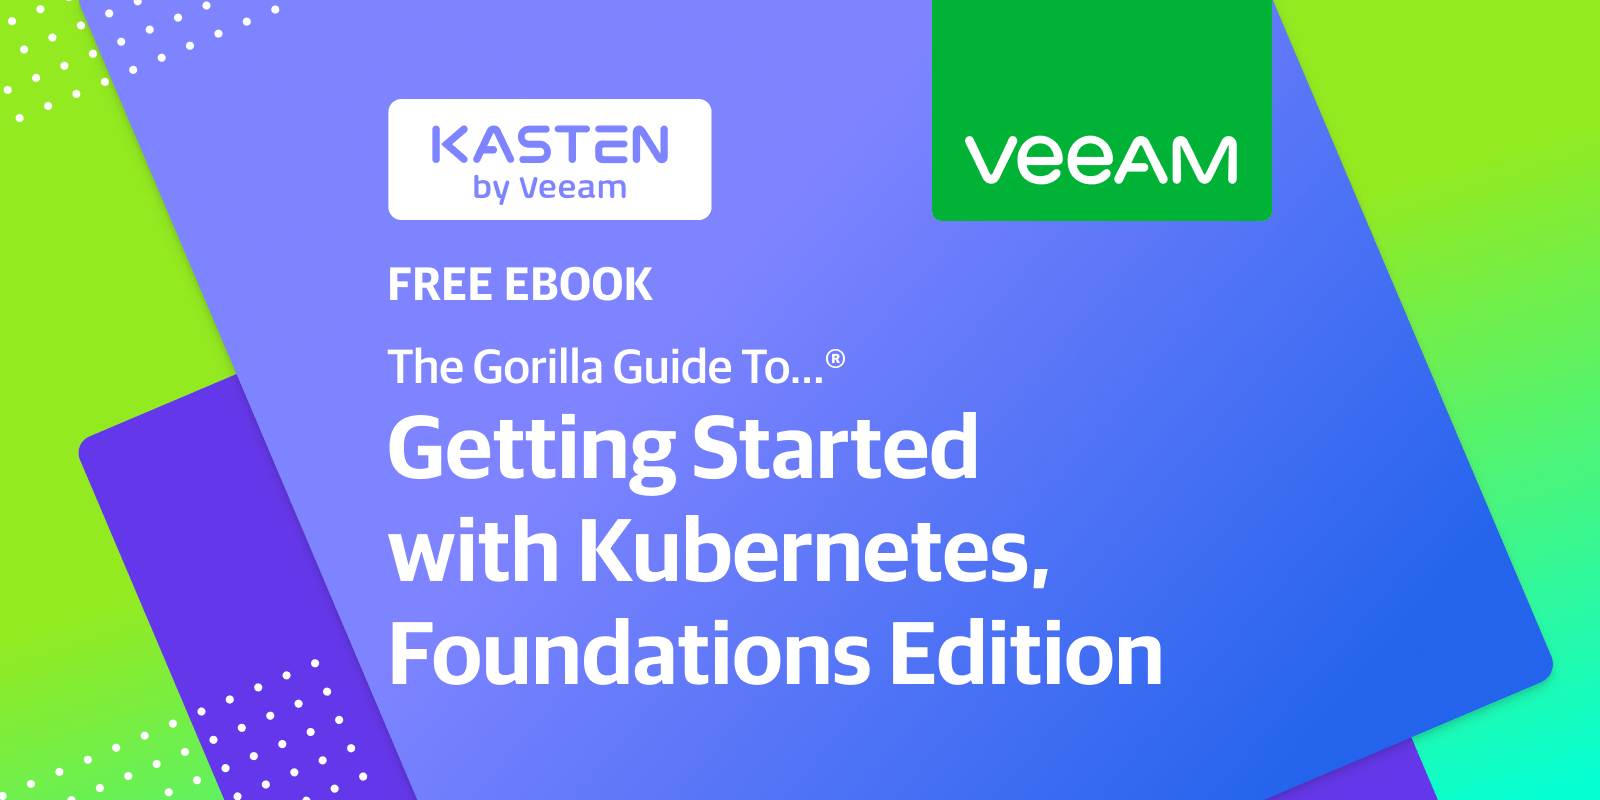 The Gorilla Guide To Getting Started With Kubernetes